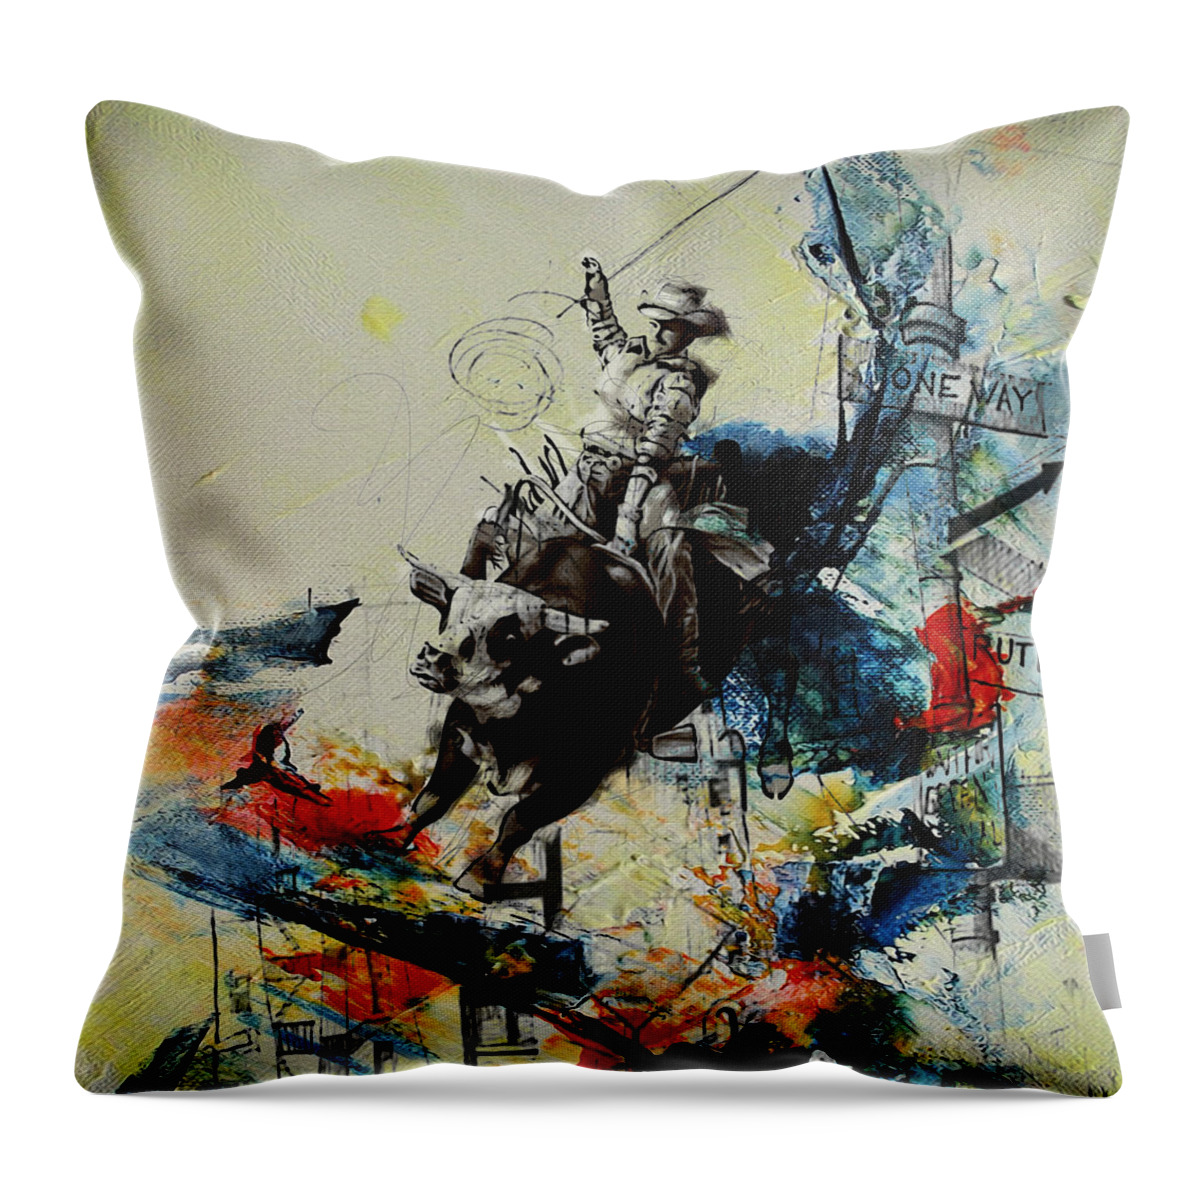 Bull Rodeo Throw Pillow featuring the painting Bull Rodeo 02 by Corporate Art Task Force